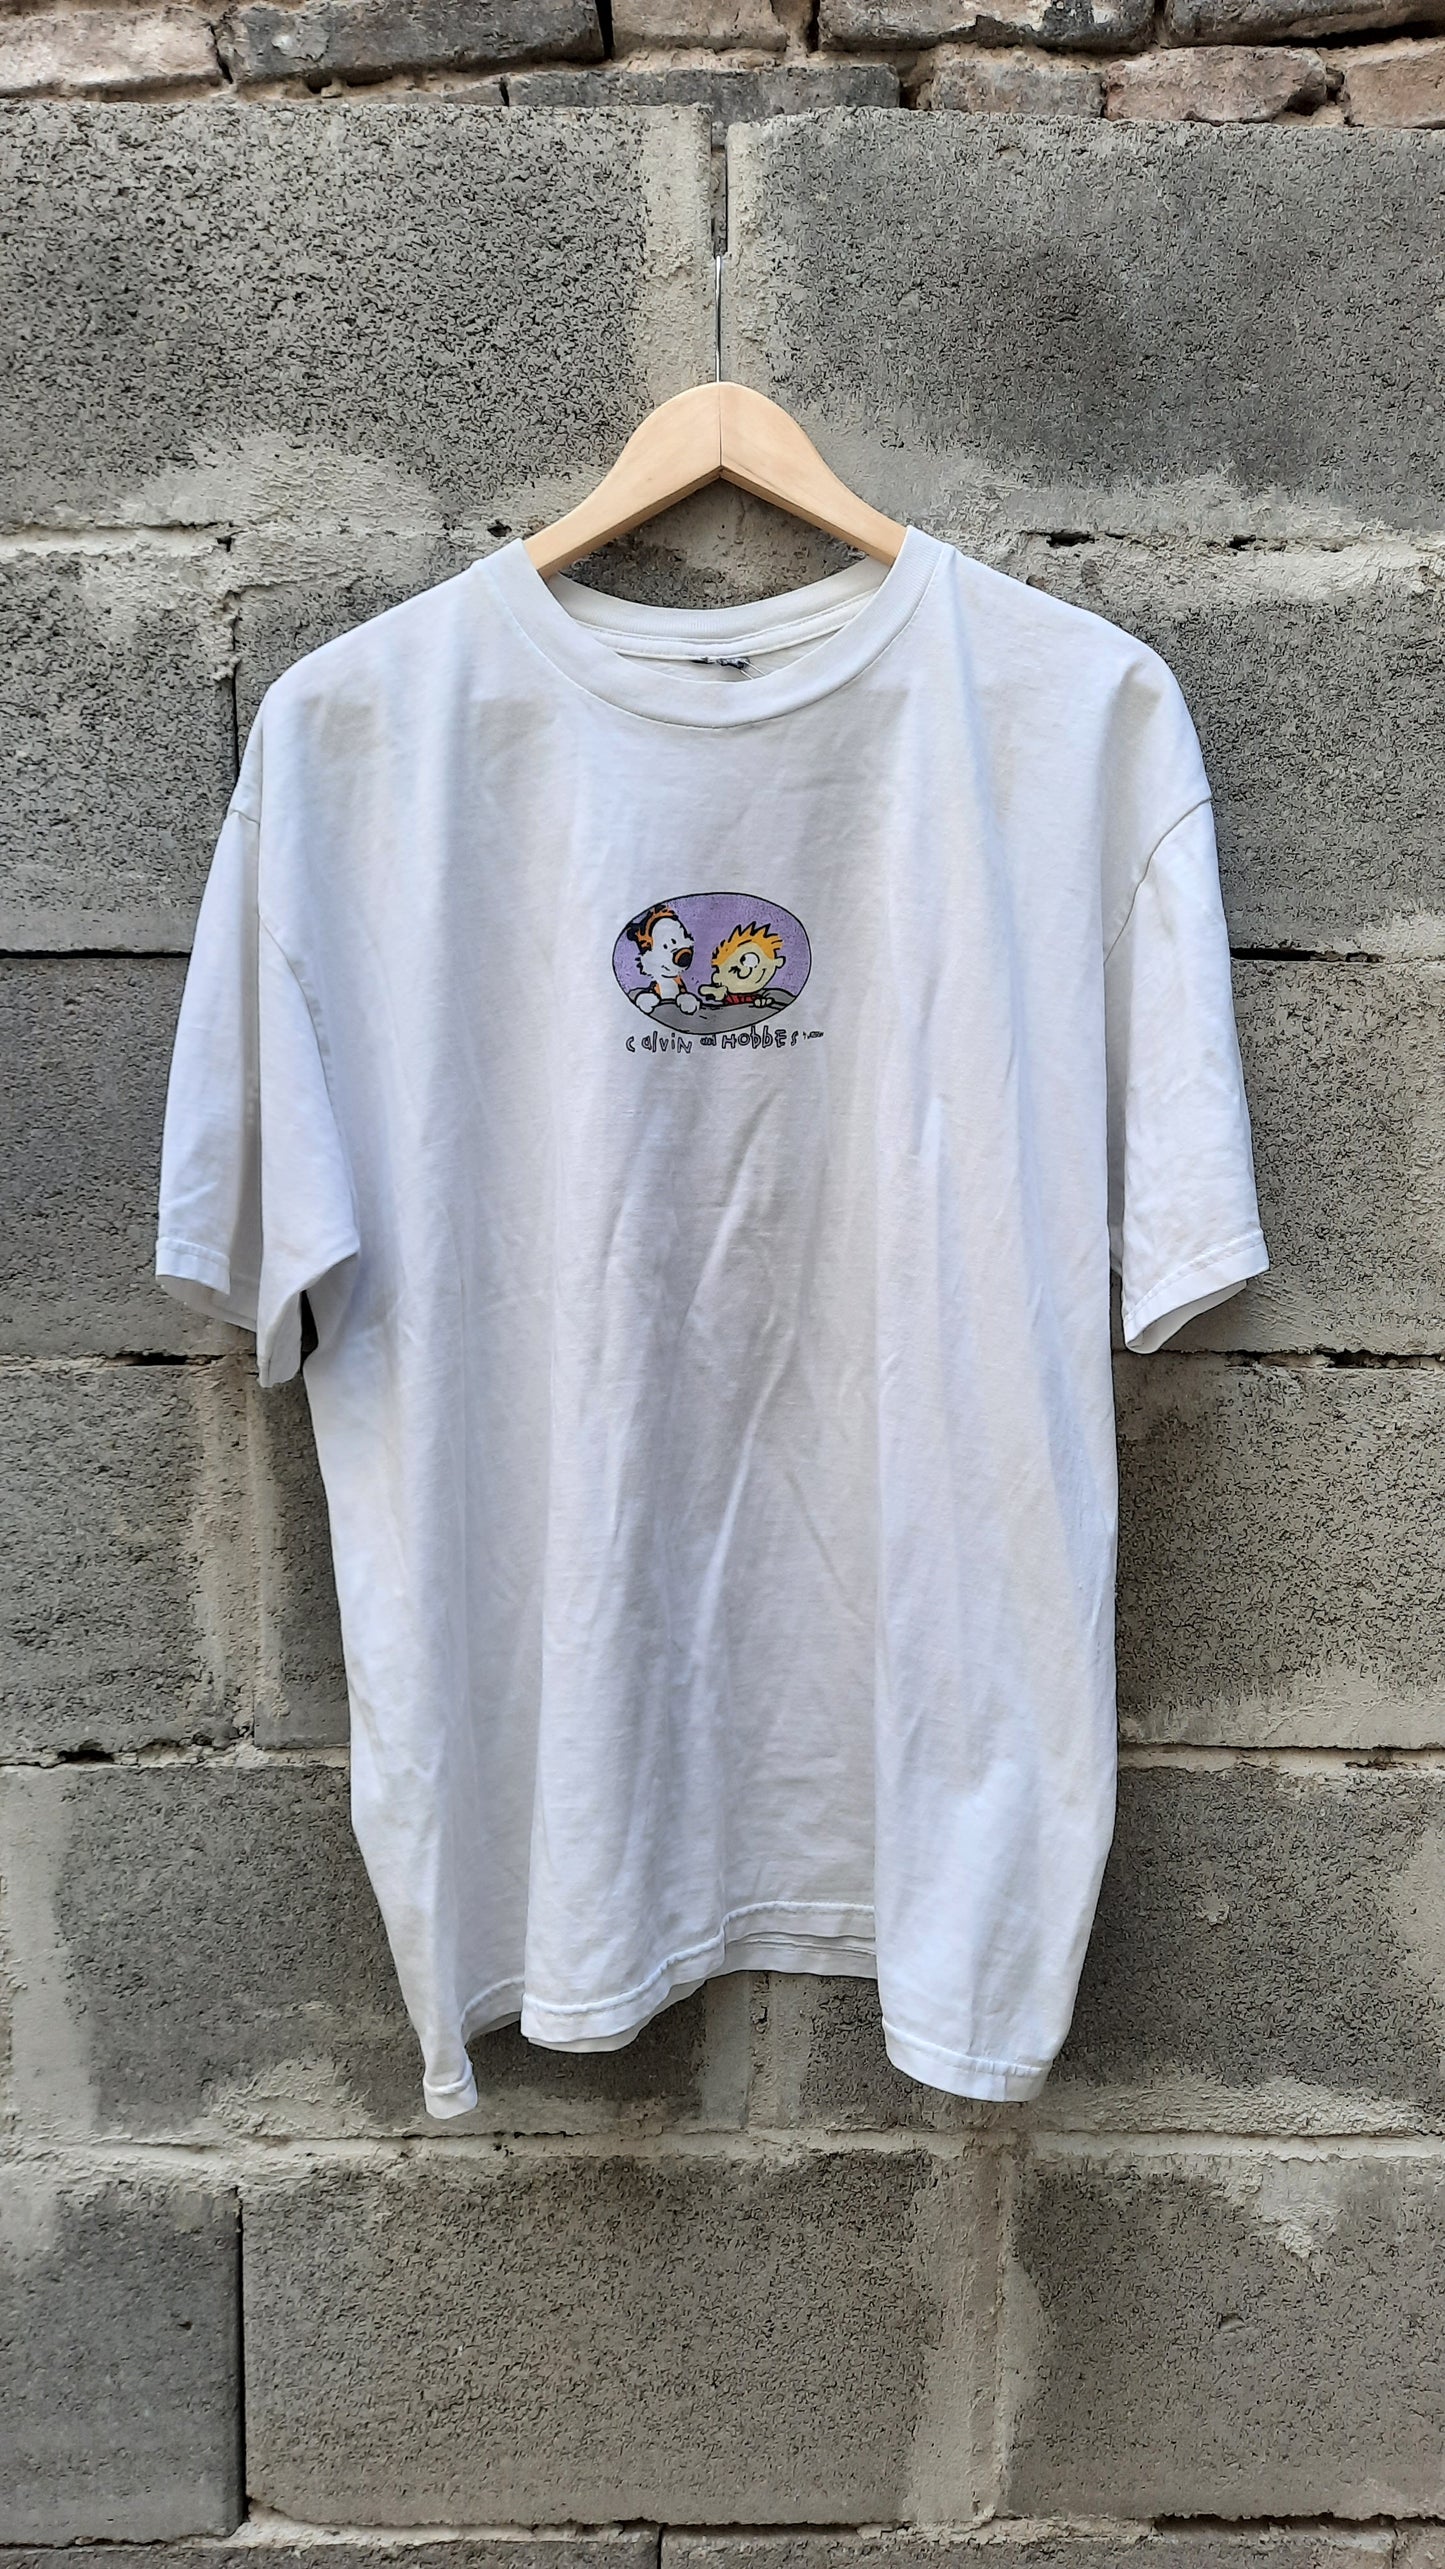 Vintage Calvin and Hobbes T-shirt